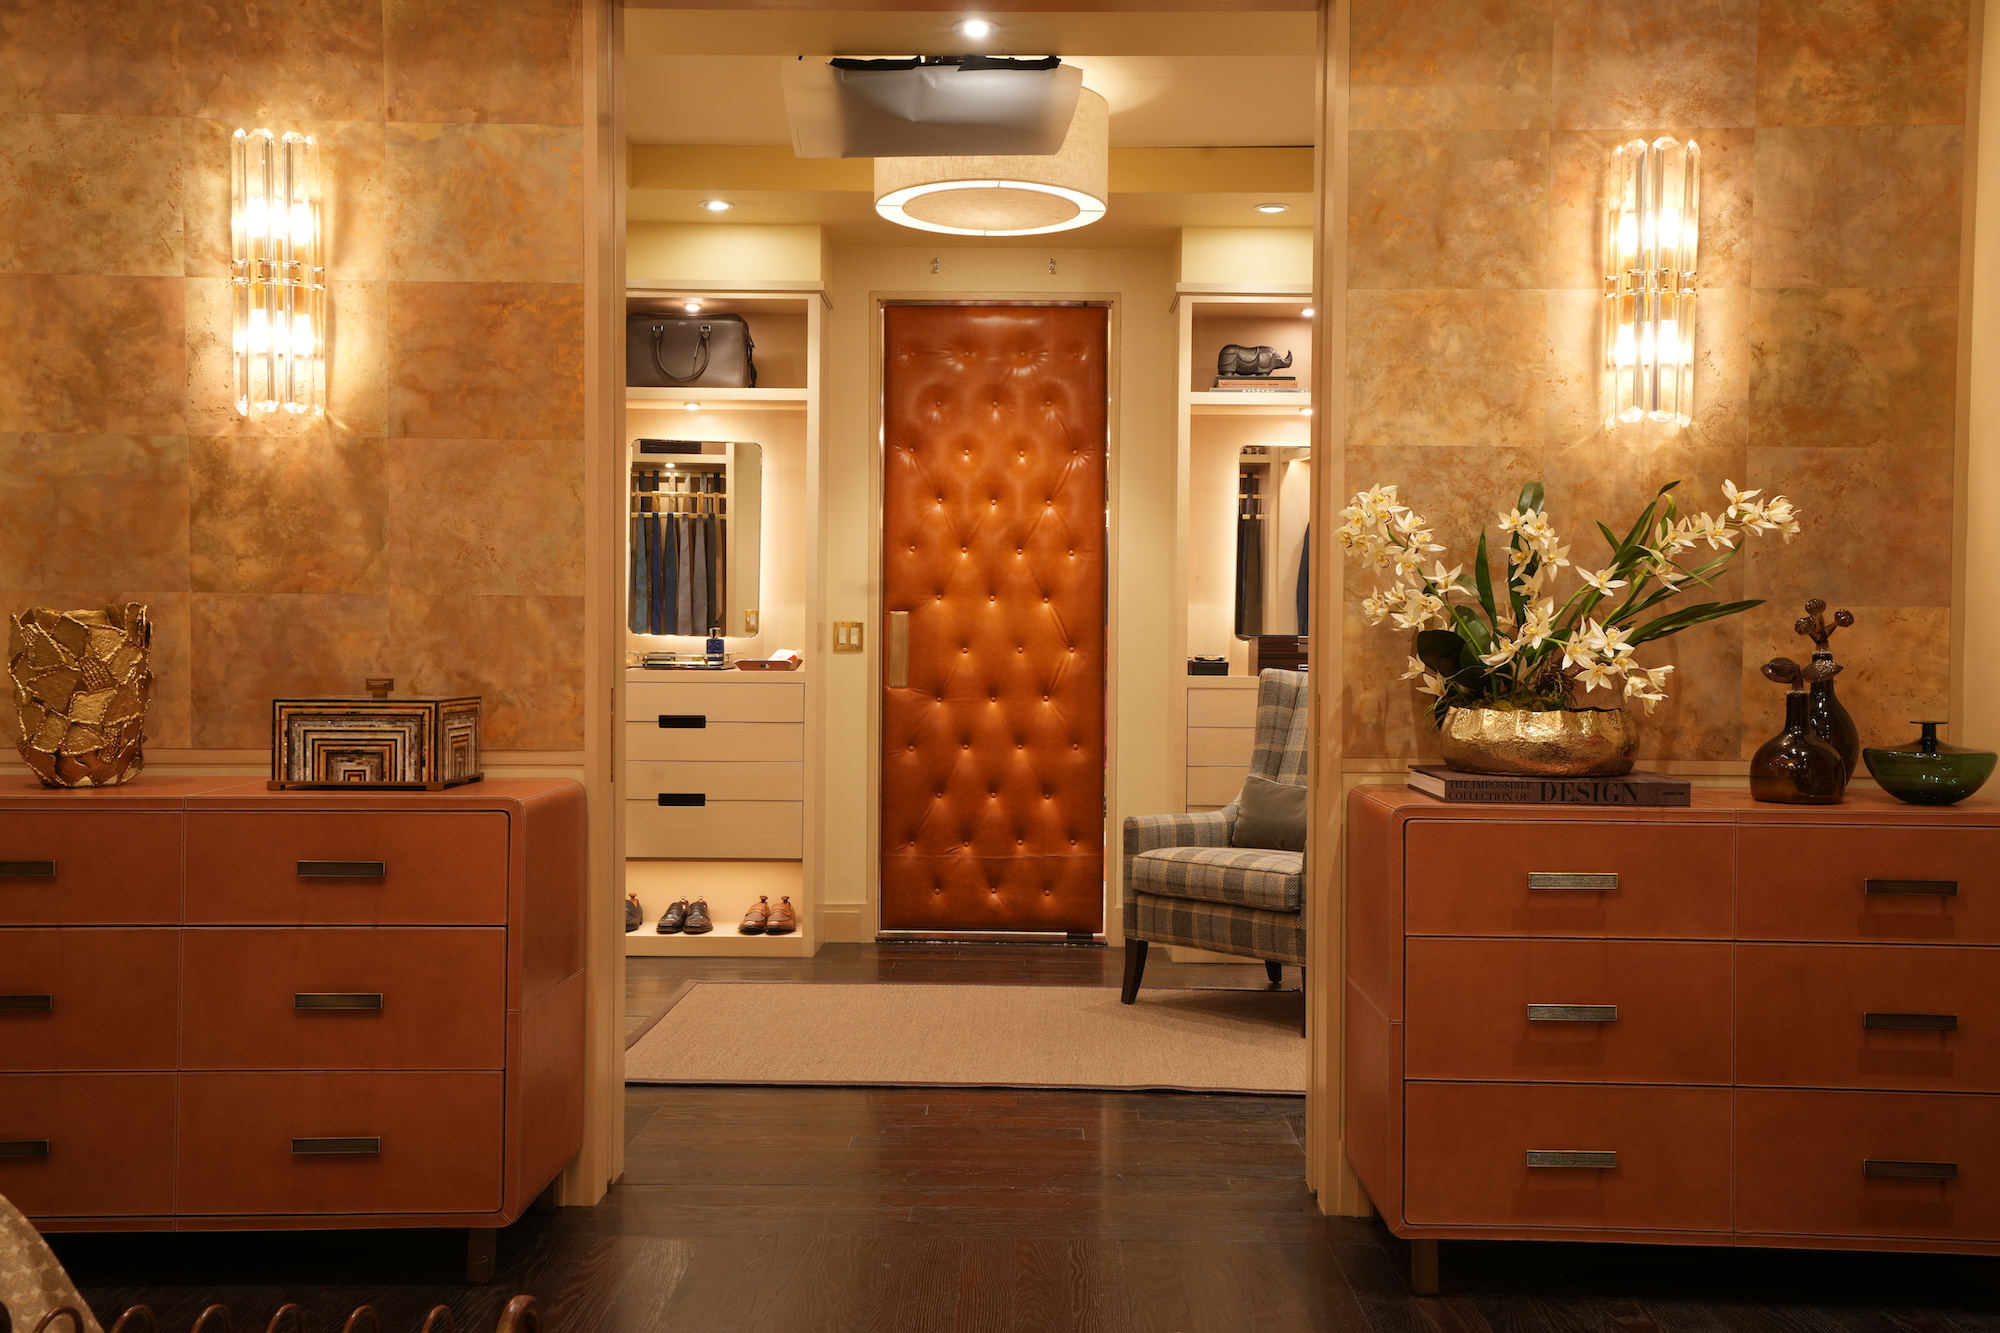 The walk-in closet in Lisa Todd Wexley’s (Nicole Ari Parker) apartment in “And Just Like That…”, with caramel button-tufted leather swinging door to separate the “his and her” spaces – Effect Magazine